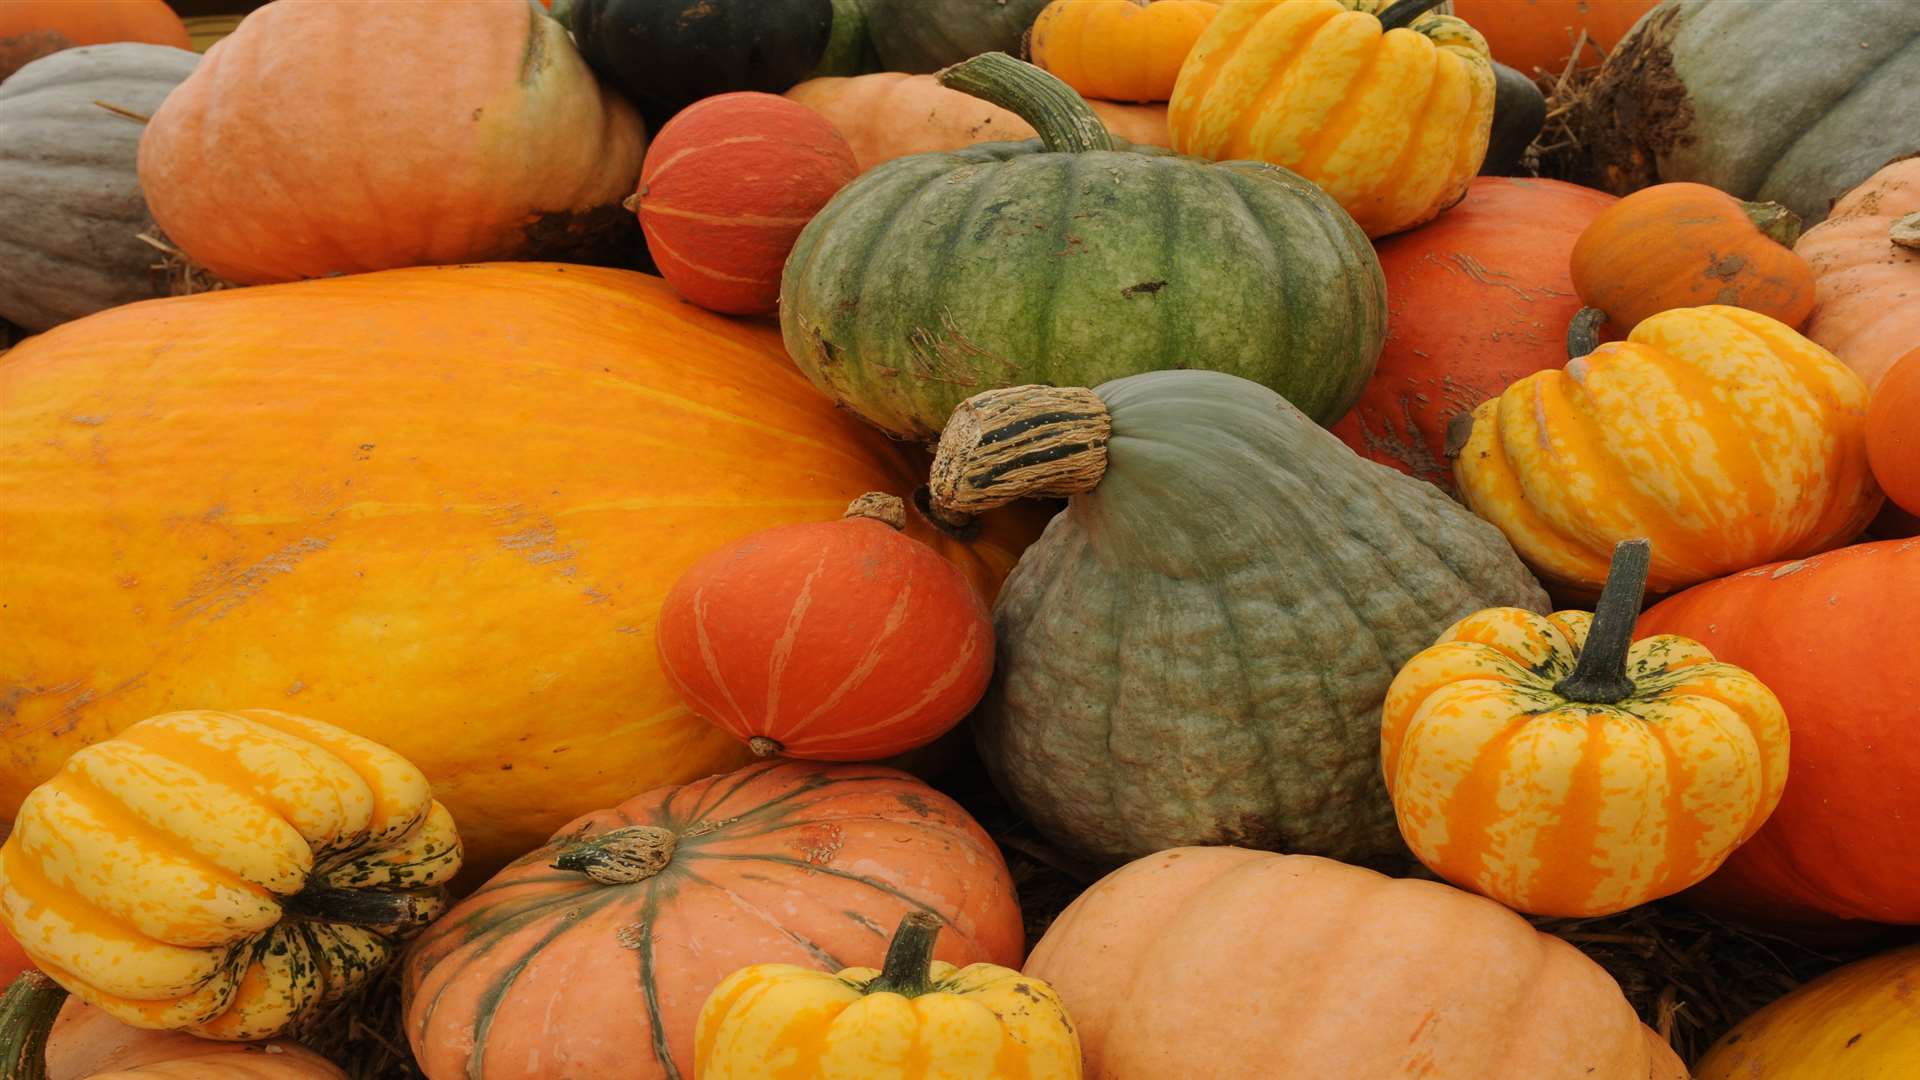 Pumpkins are a member of the gourd family, which includes cucumbers, melons and aubergines